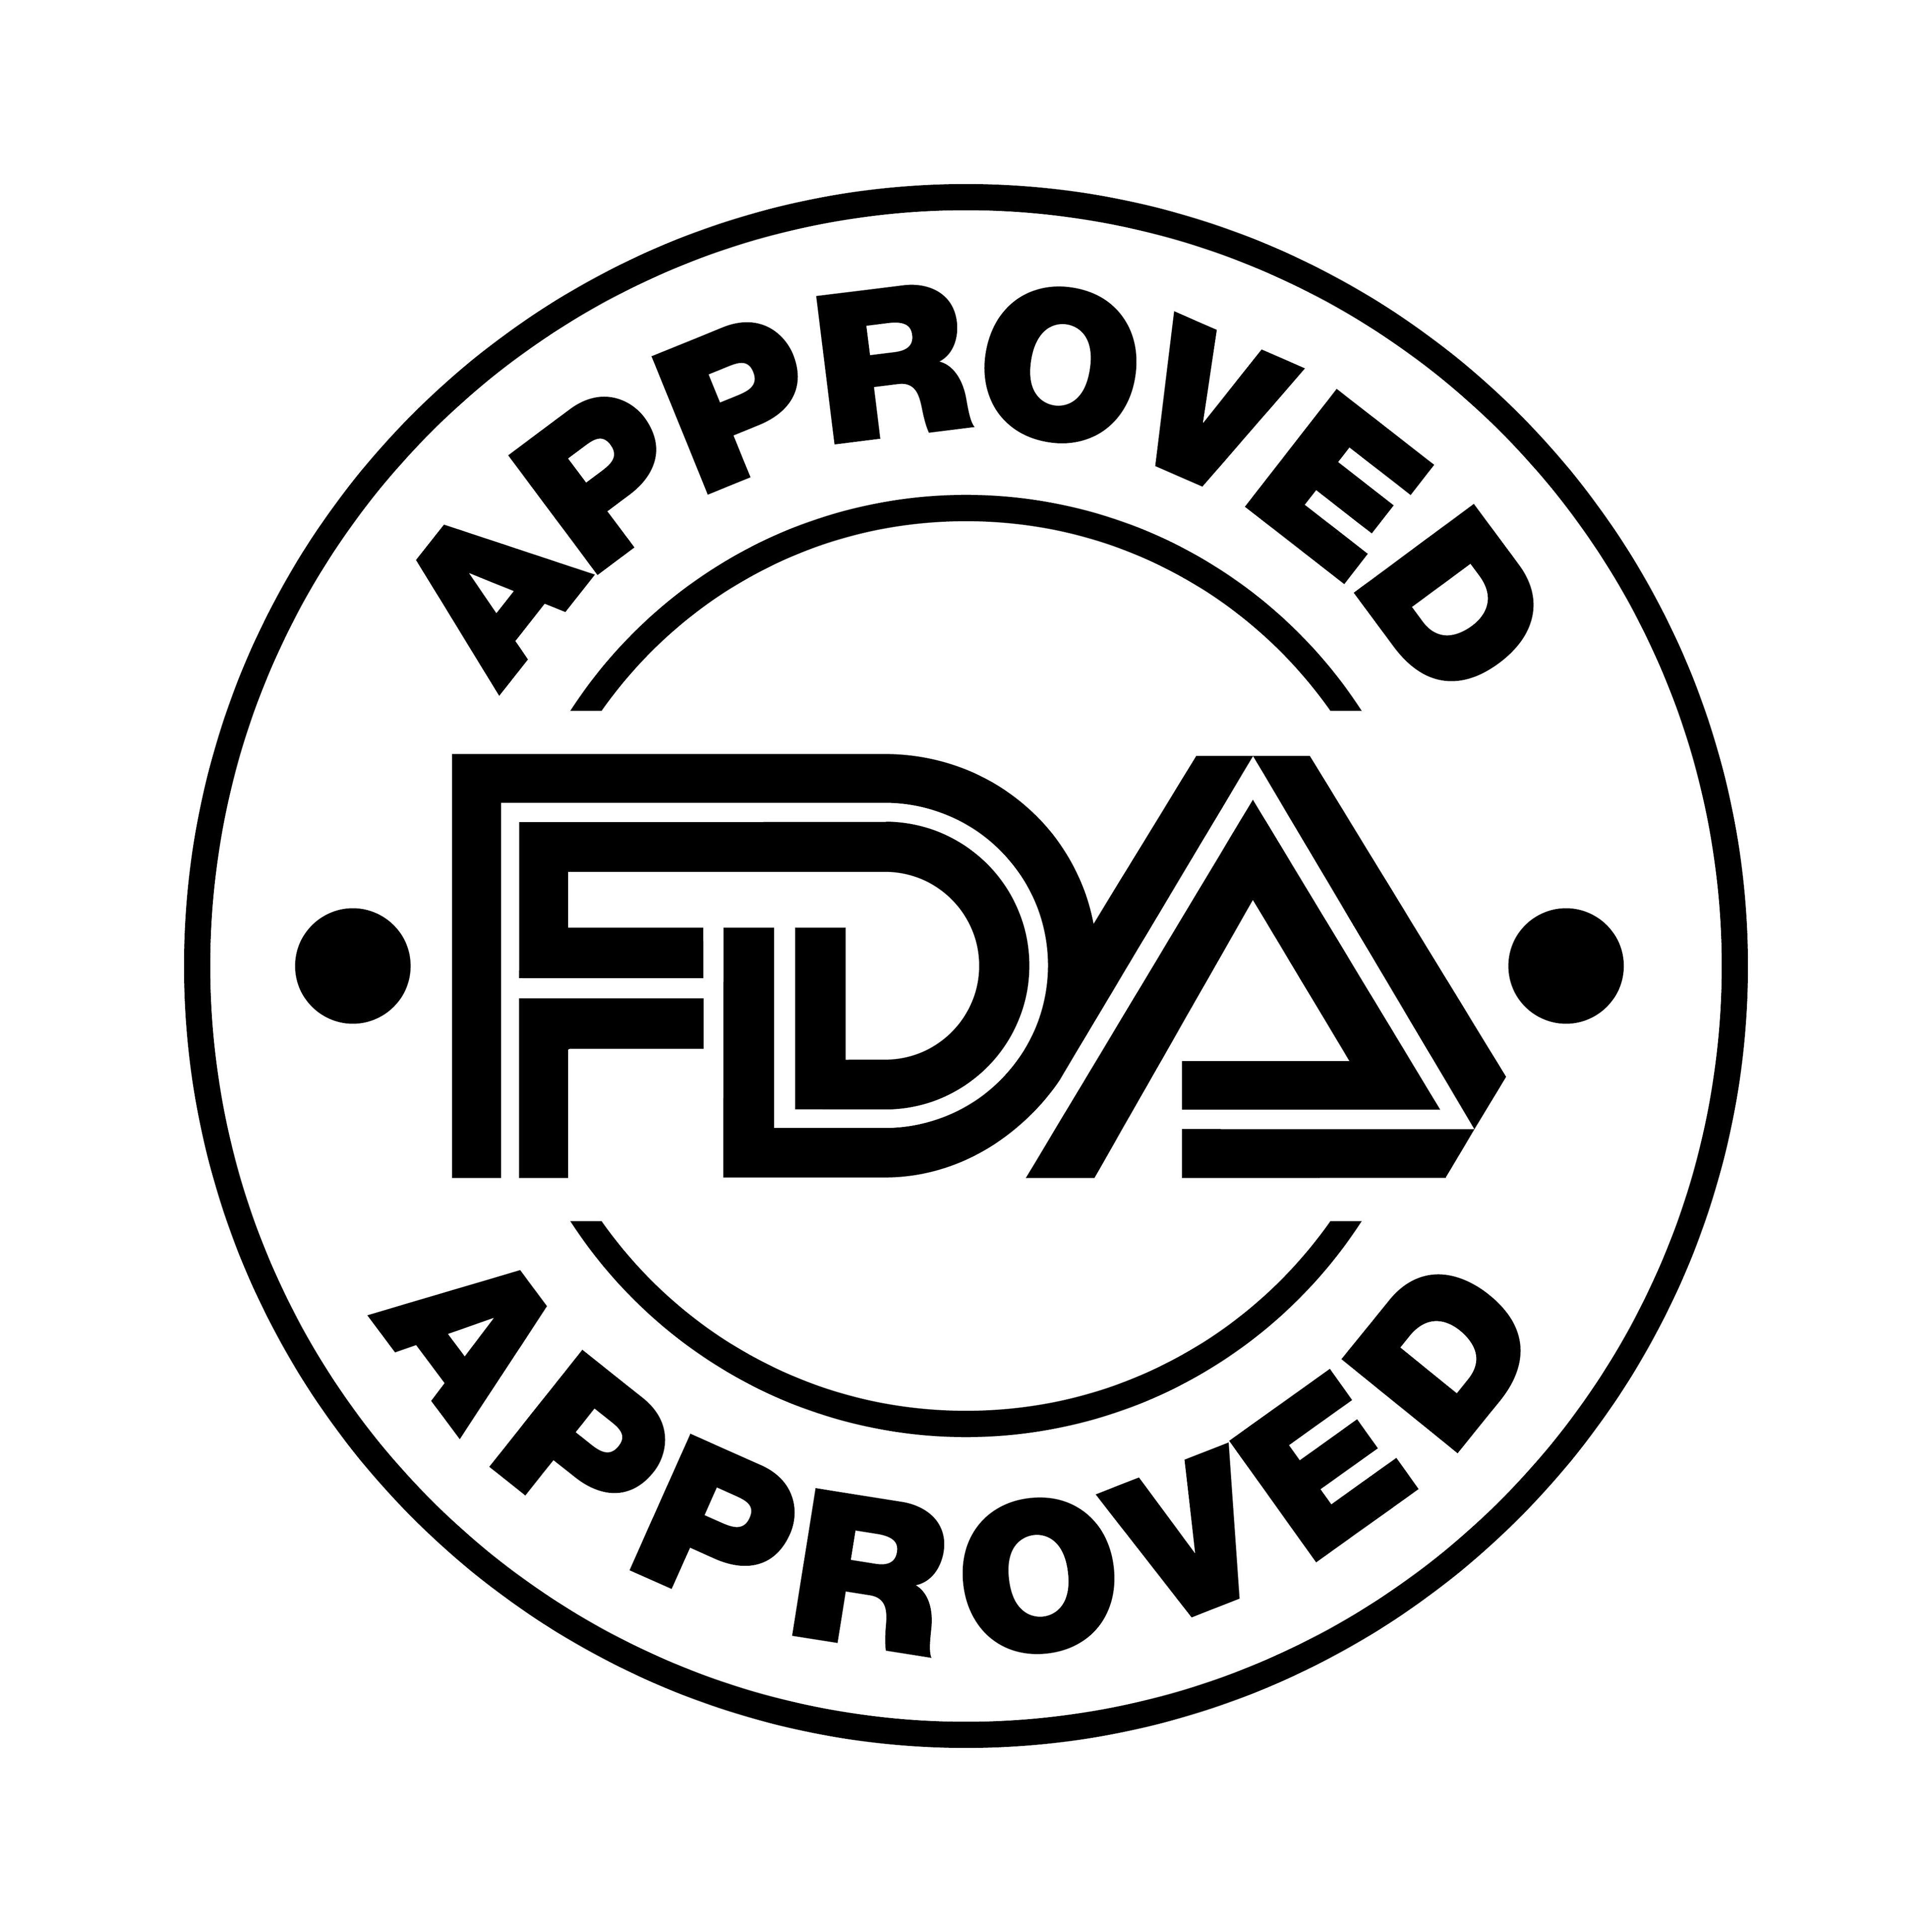 Diagnostic Tool That Identifies Patients Suitable for Keytruda Treatment Gets Latest FDA Approval